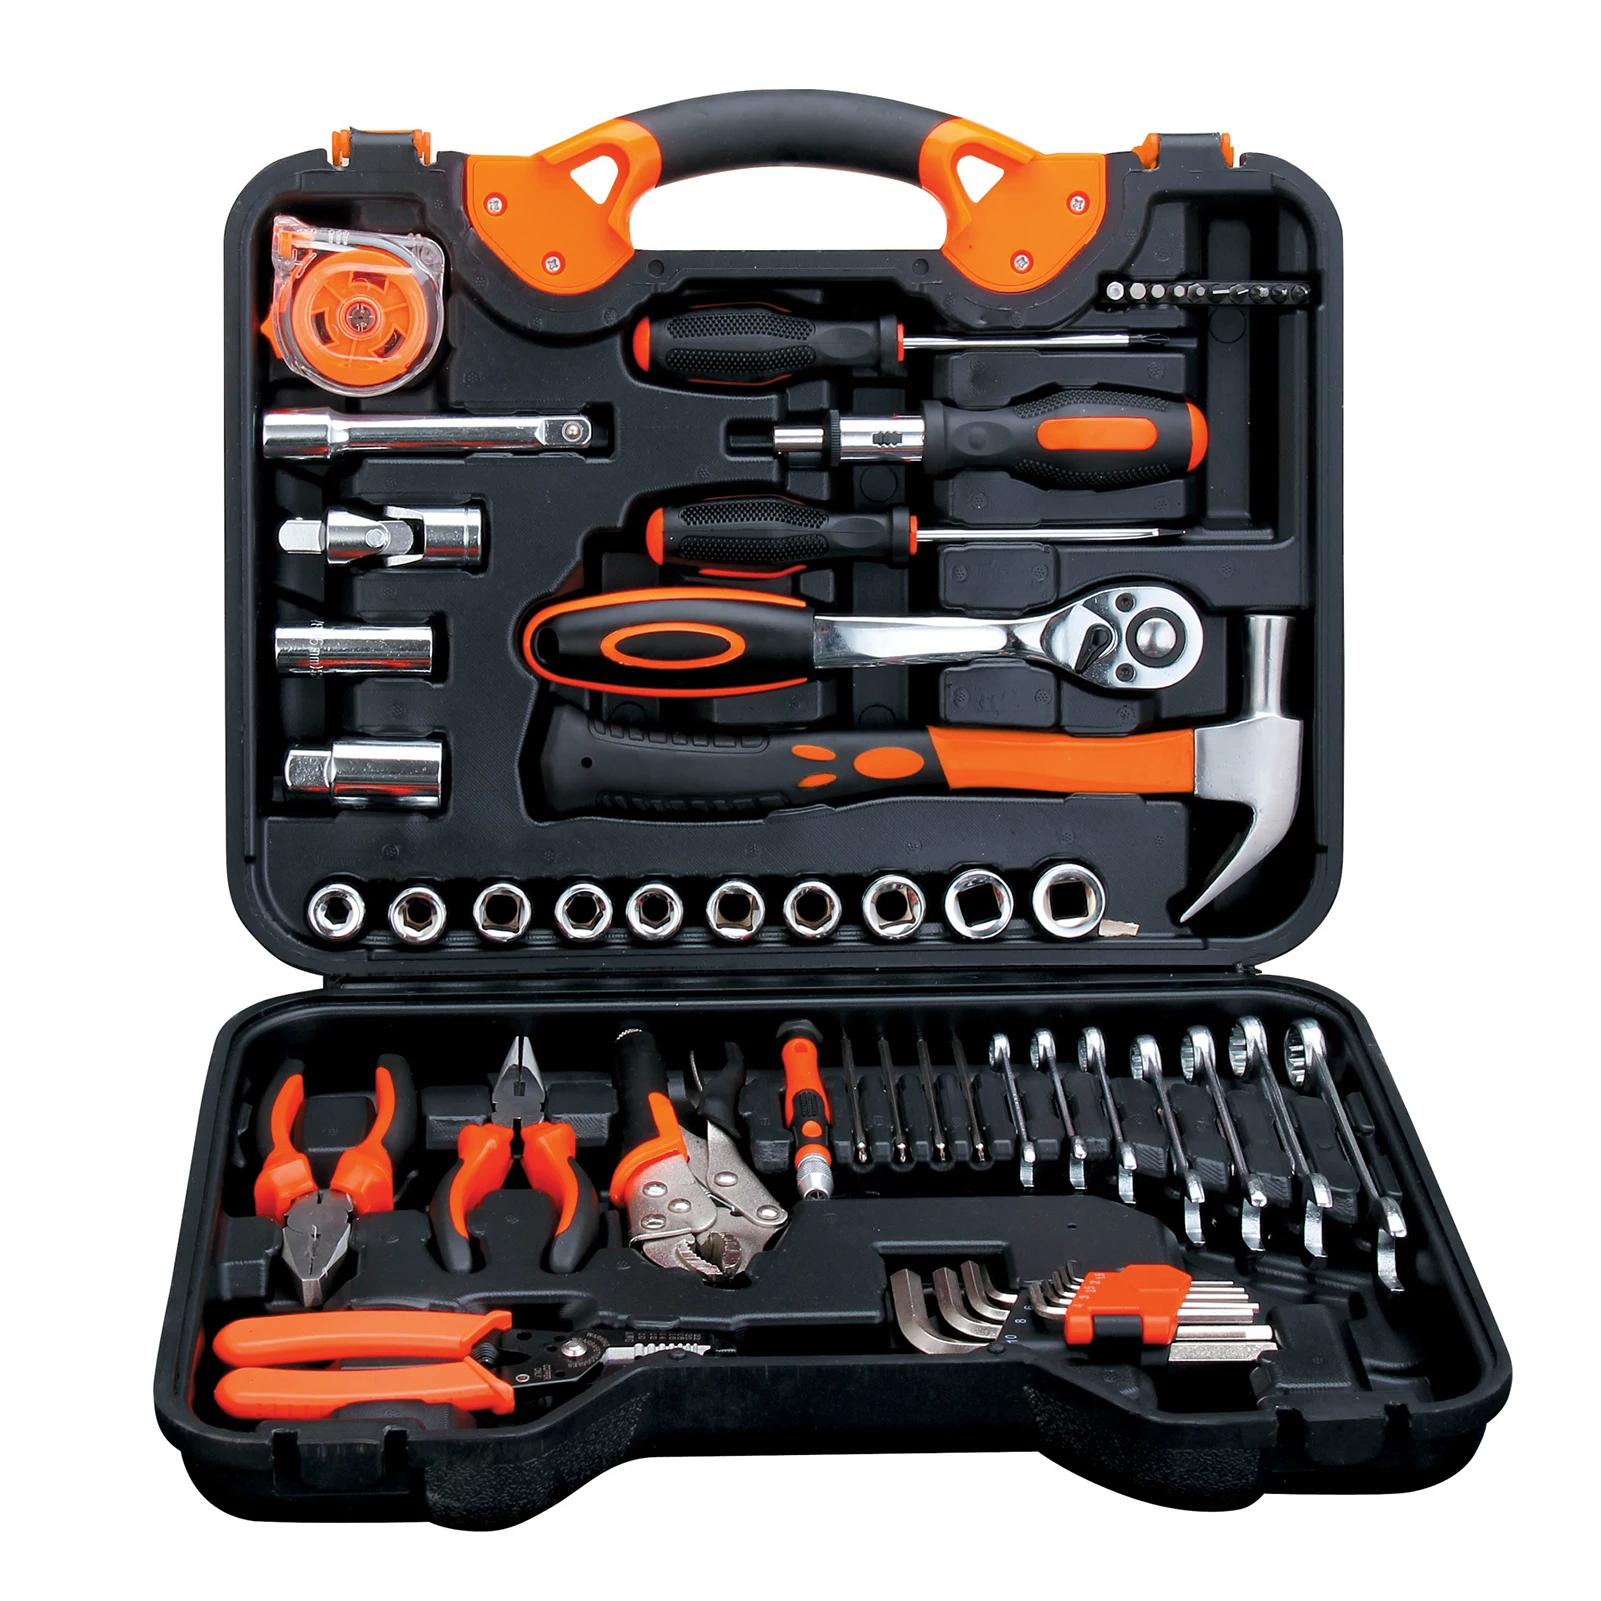 

55-Piece Tool Set General Household Hand Tool Kit with Plastic Toolbox Wrench Sockets Screwdrivers Pliers for Home Repair Tools